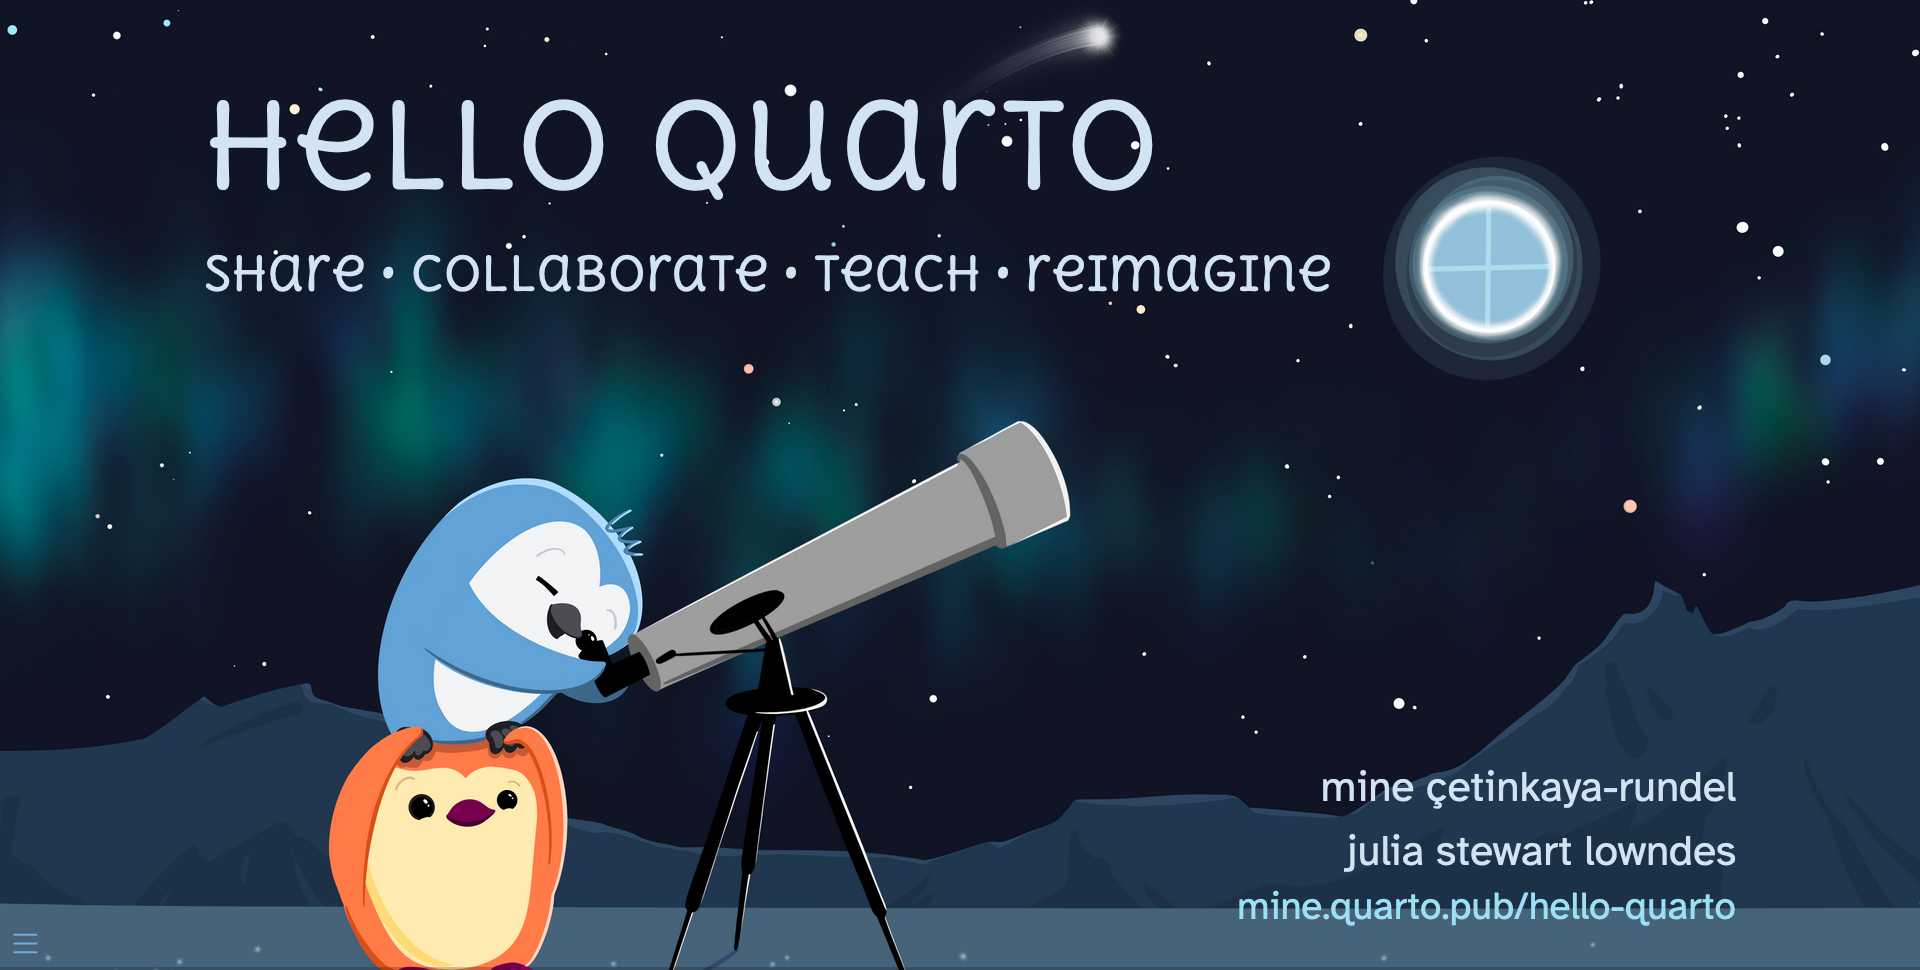 One penguin standing on another penguin’s shoulders in a snowscape, looking through a telescope at a Quarto logo “moon” in the night sky.